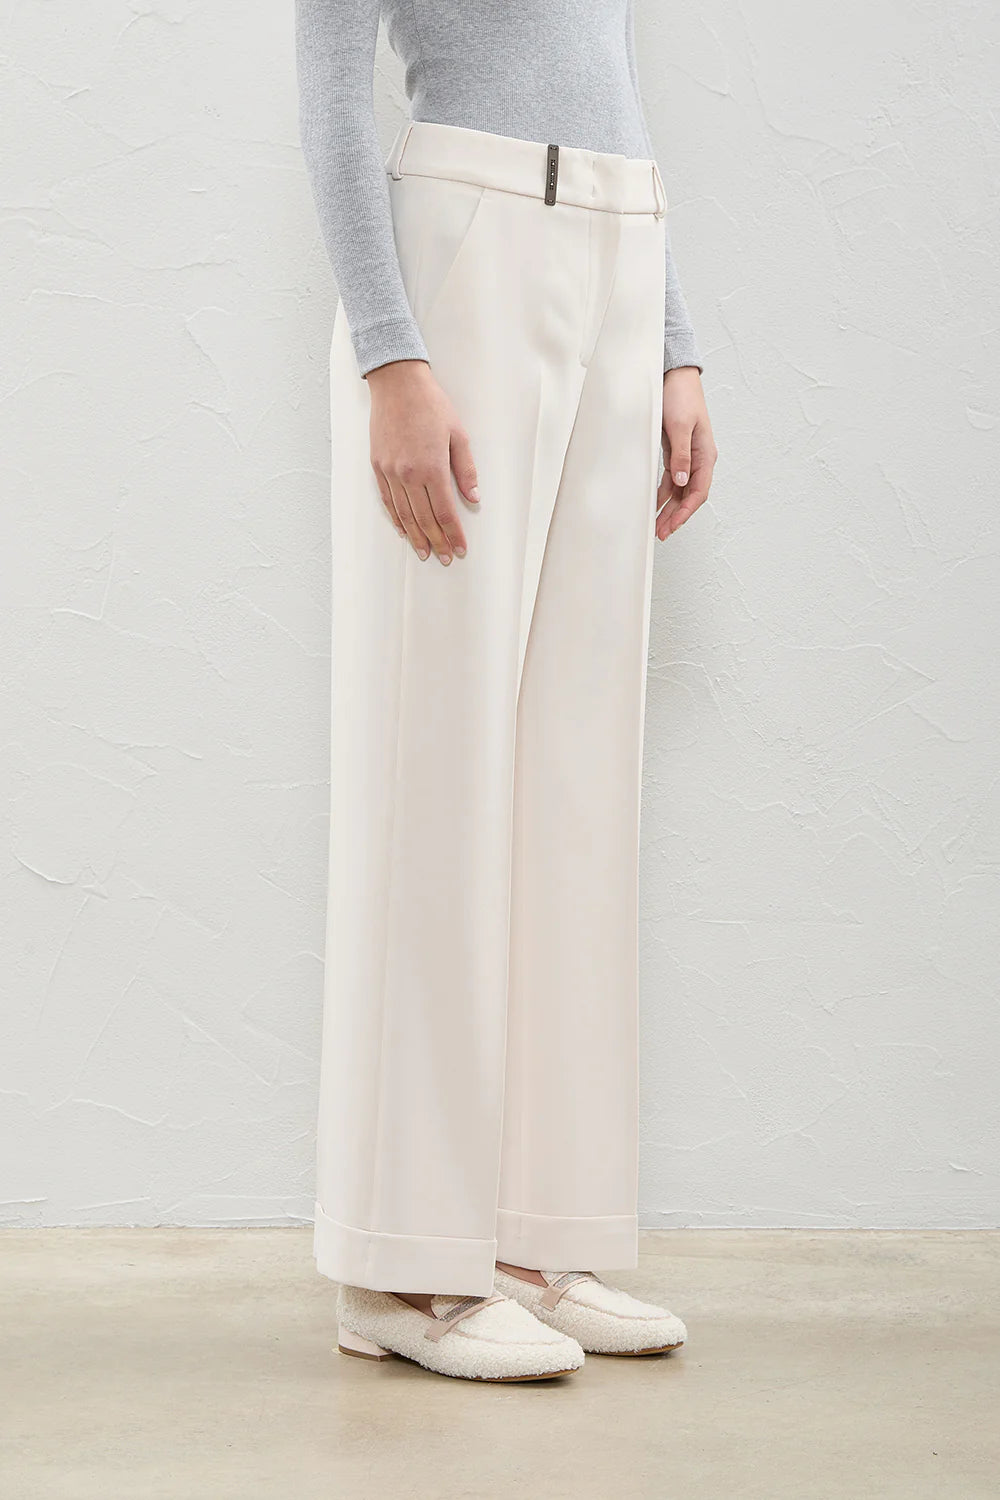 Reiss Sienna Crepe Wide Leg Suit Trousers | REISS USA